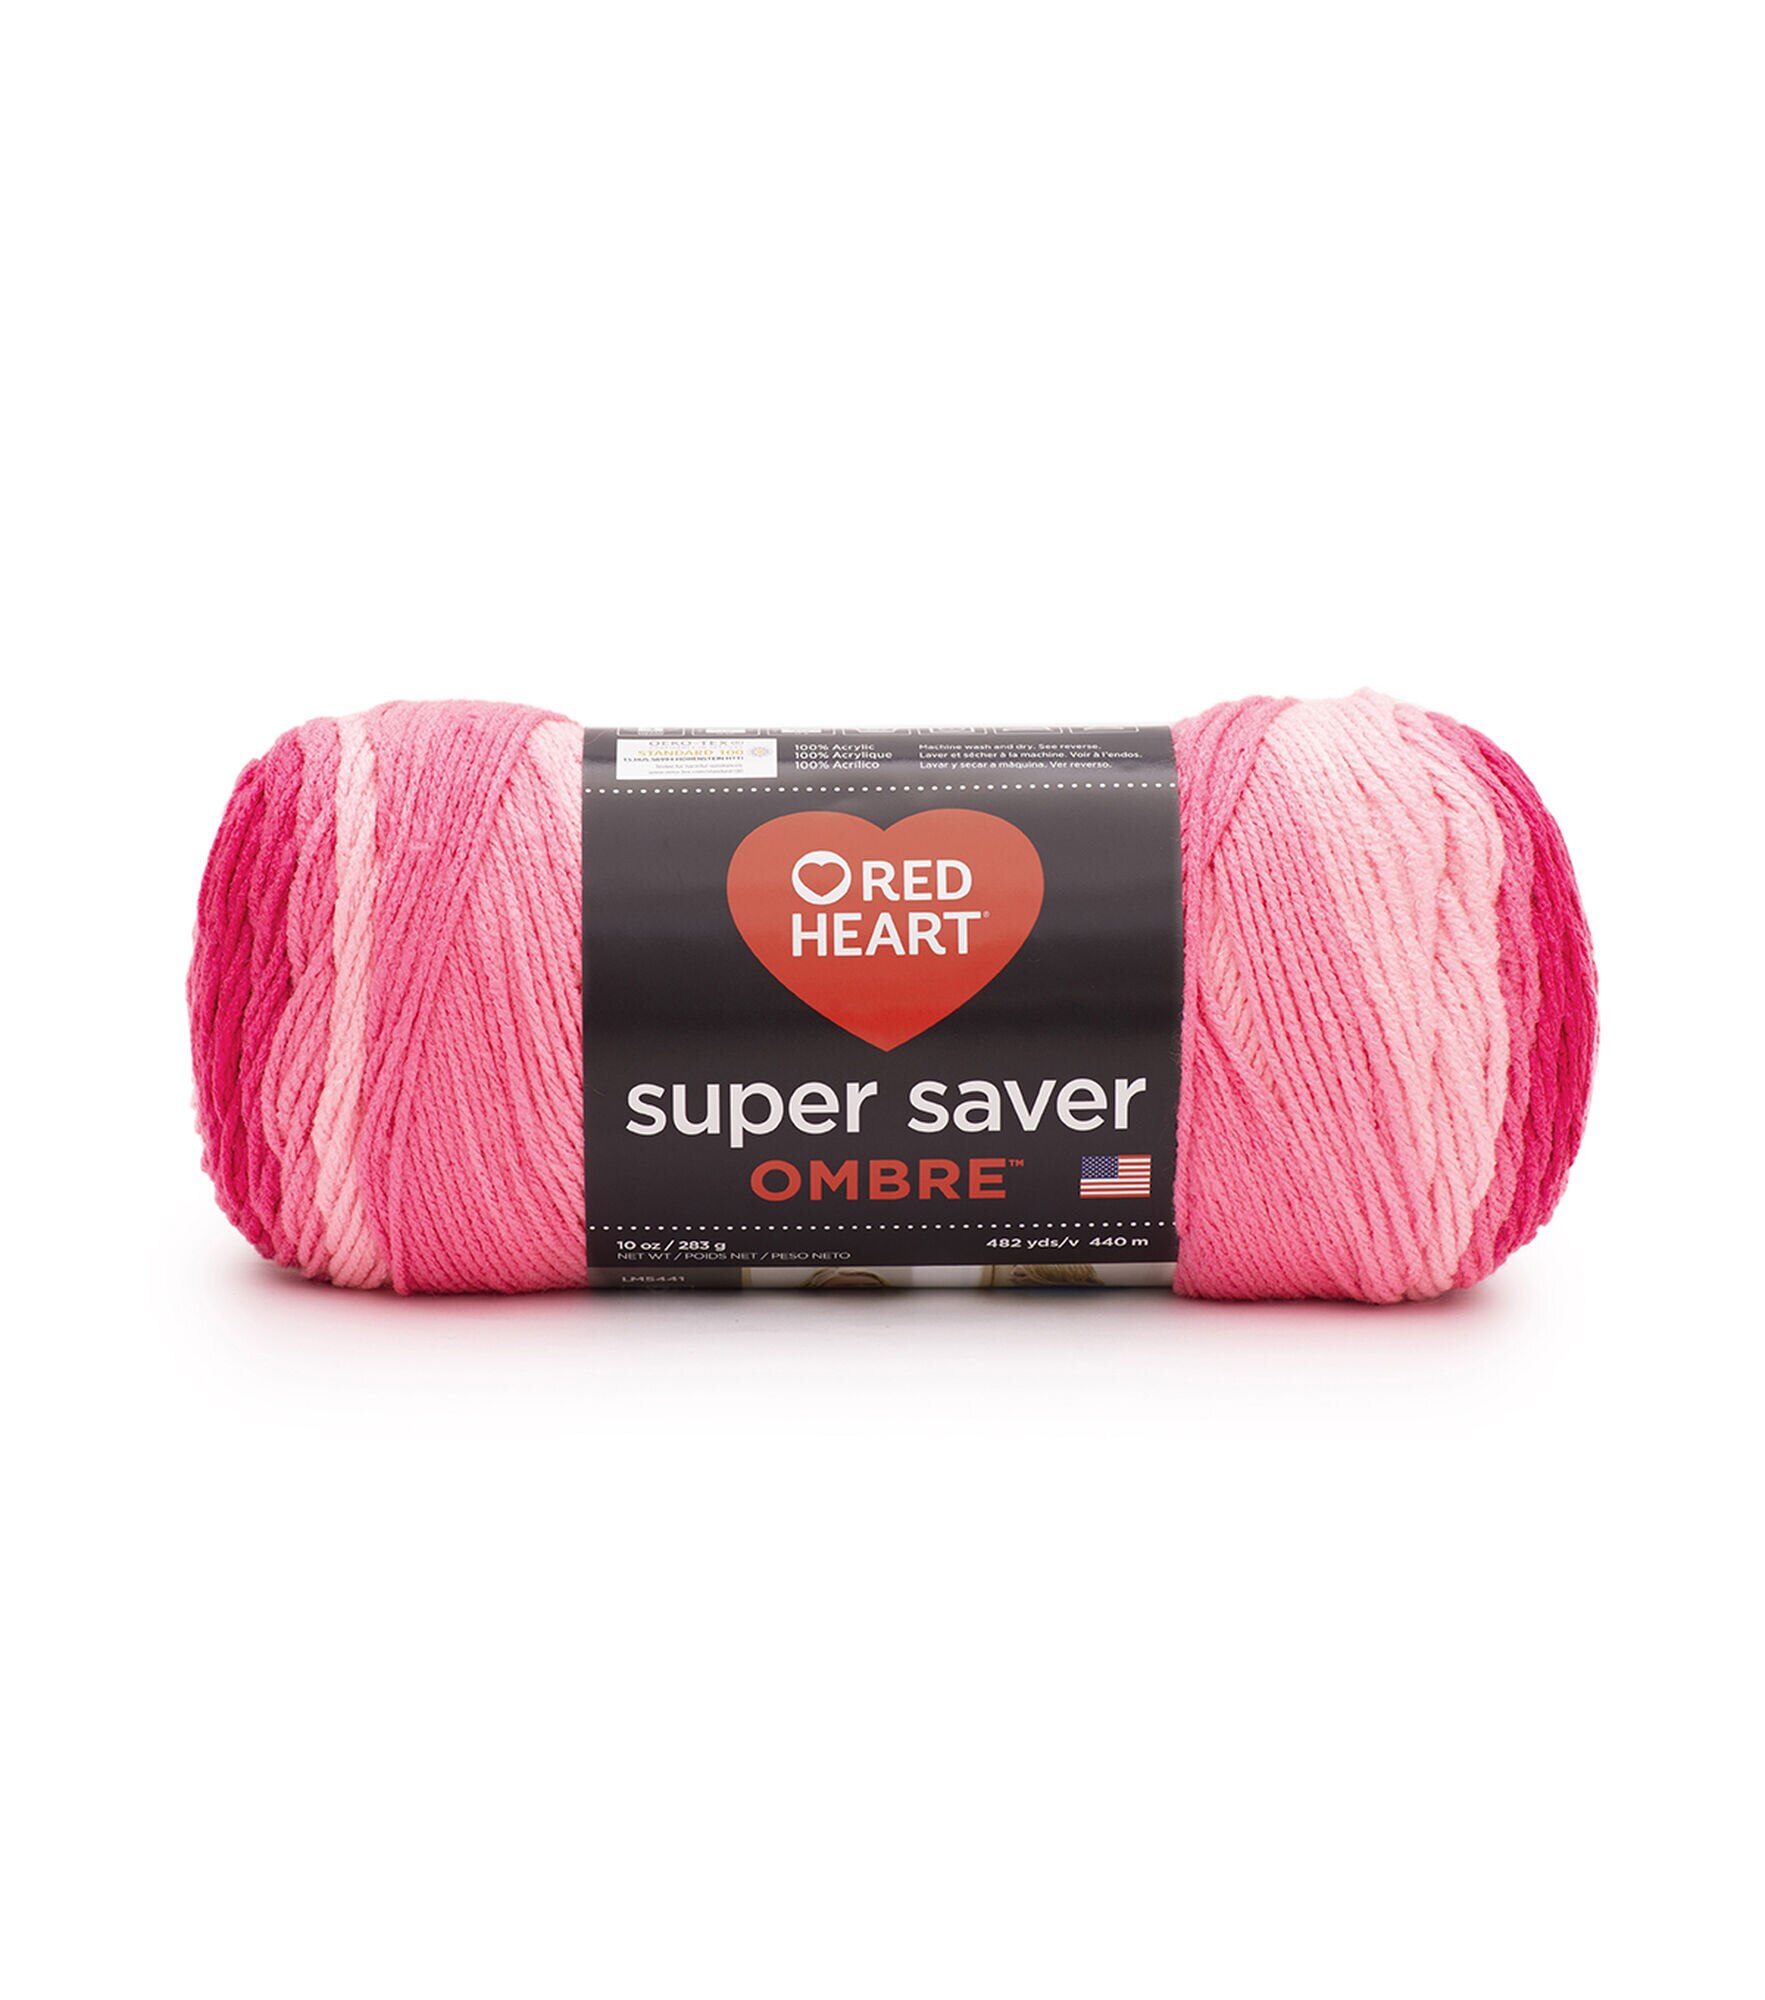 Cocoa ombre - Made in Turkey, Red Heart Super Saver Ombre Yarn, variegated,  gradient, color blend, acrylic worsted #4 weight